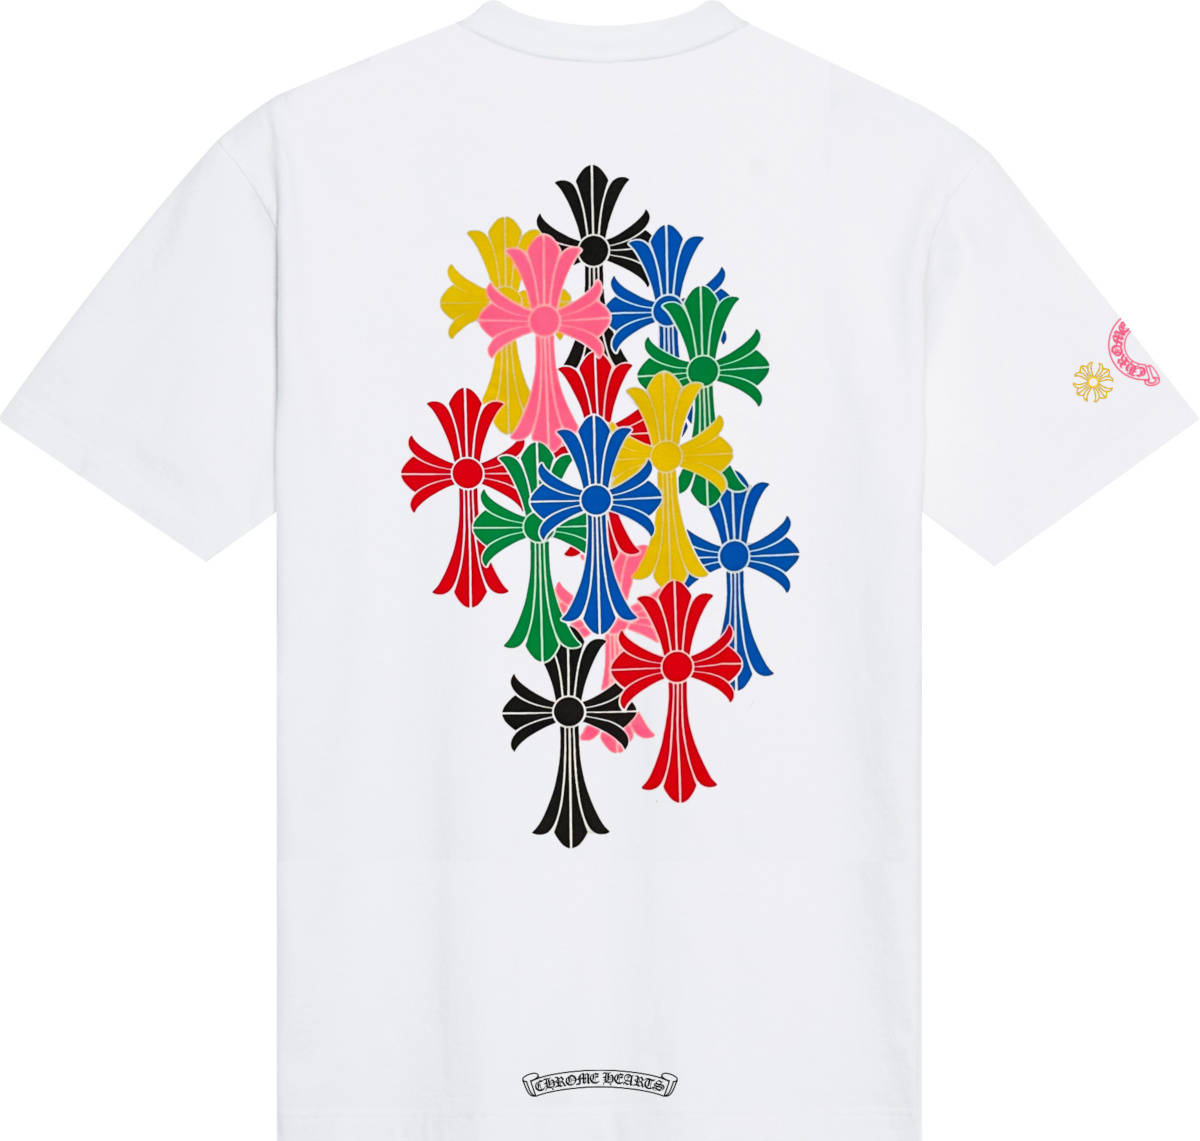 Colorful Chrome Hearts On White Shirt